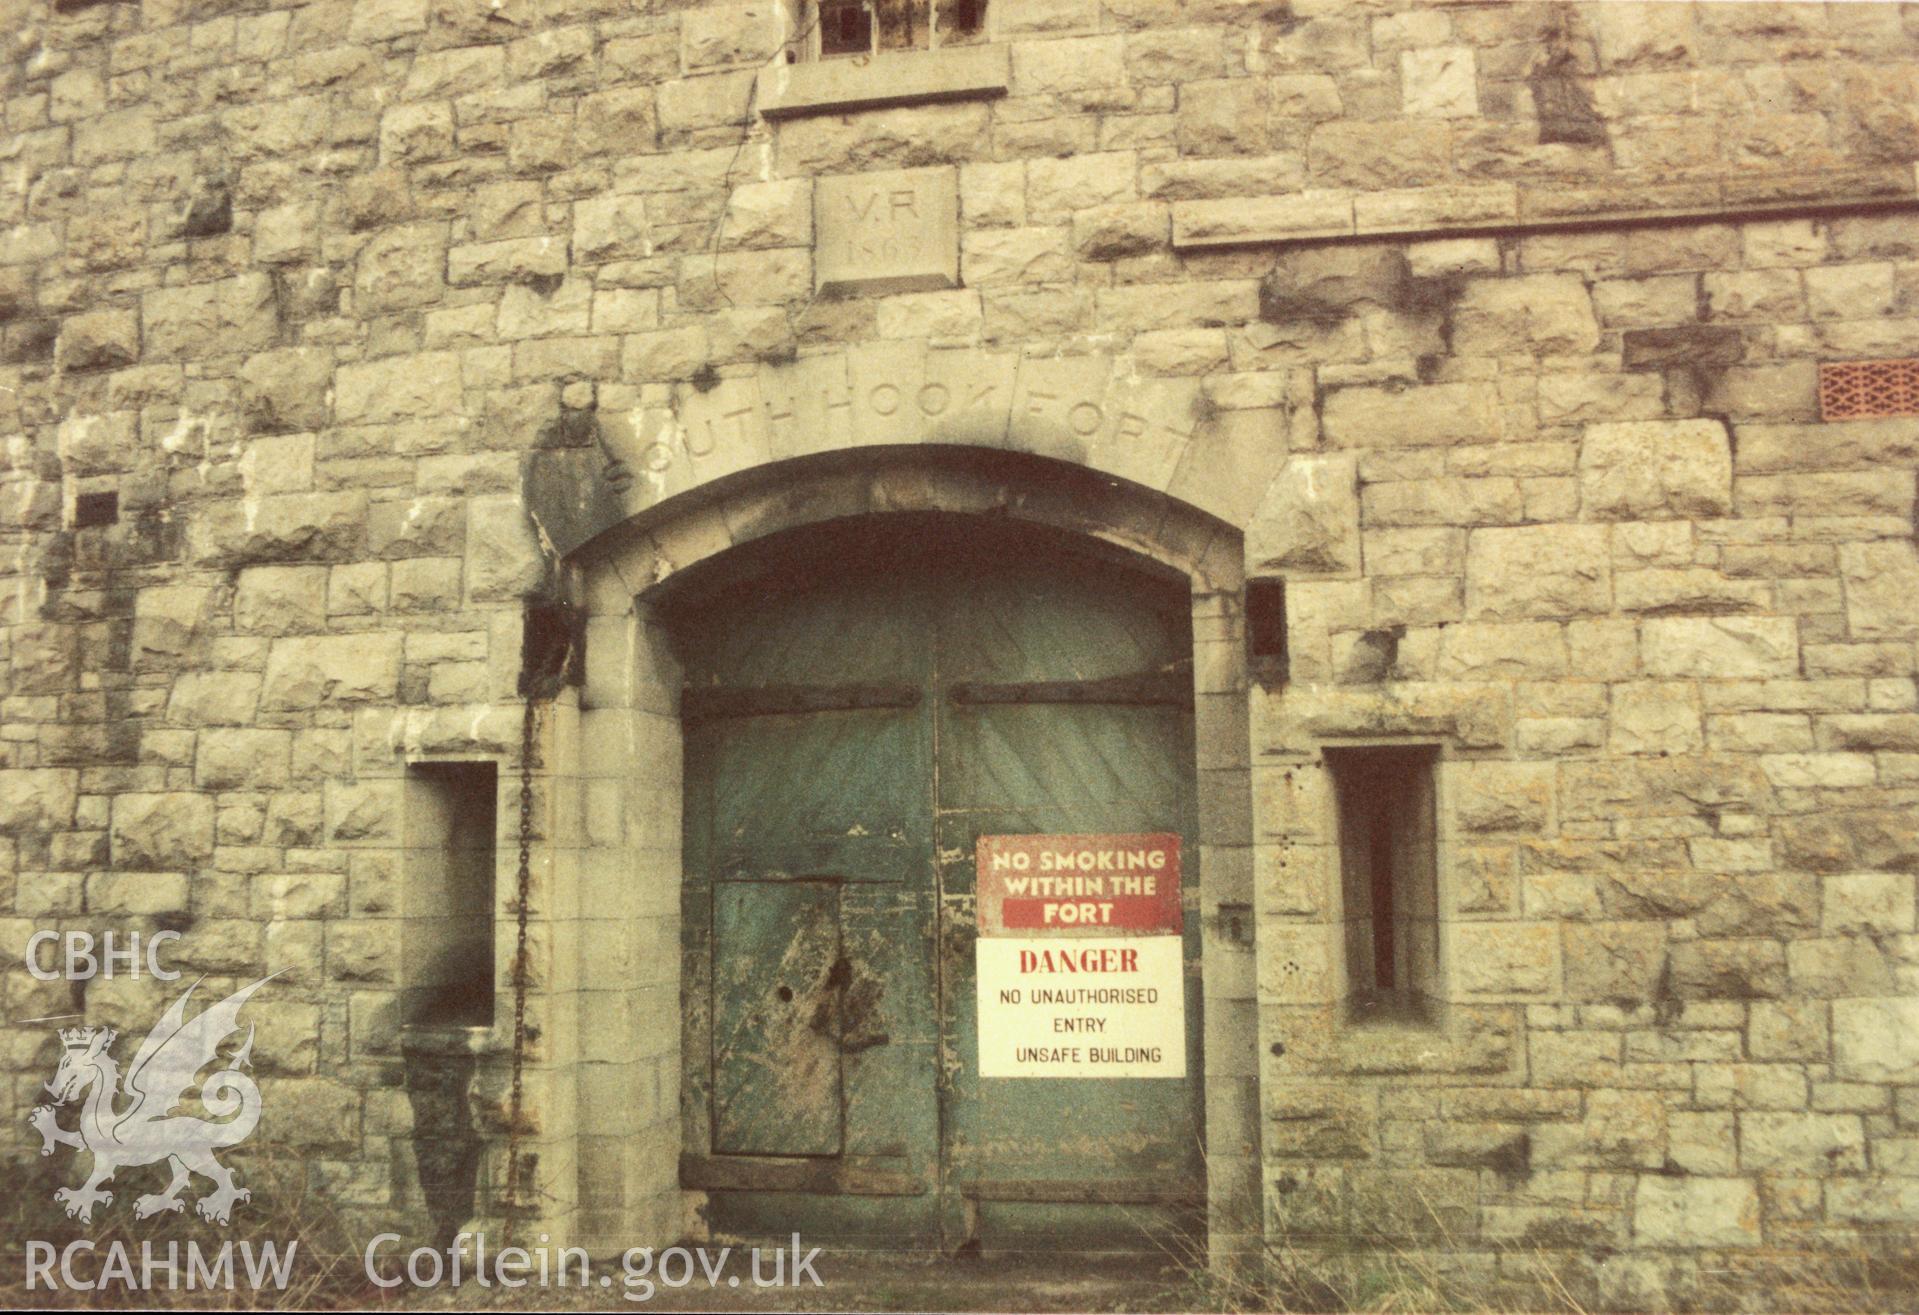 View of South Hook Fort entrance, taken by W. Jones of Cadw circa 1986